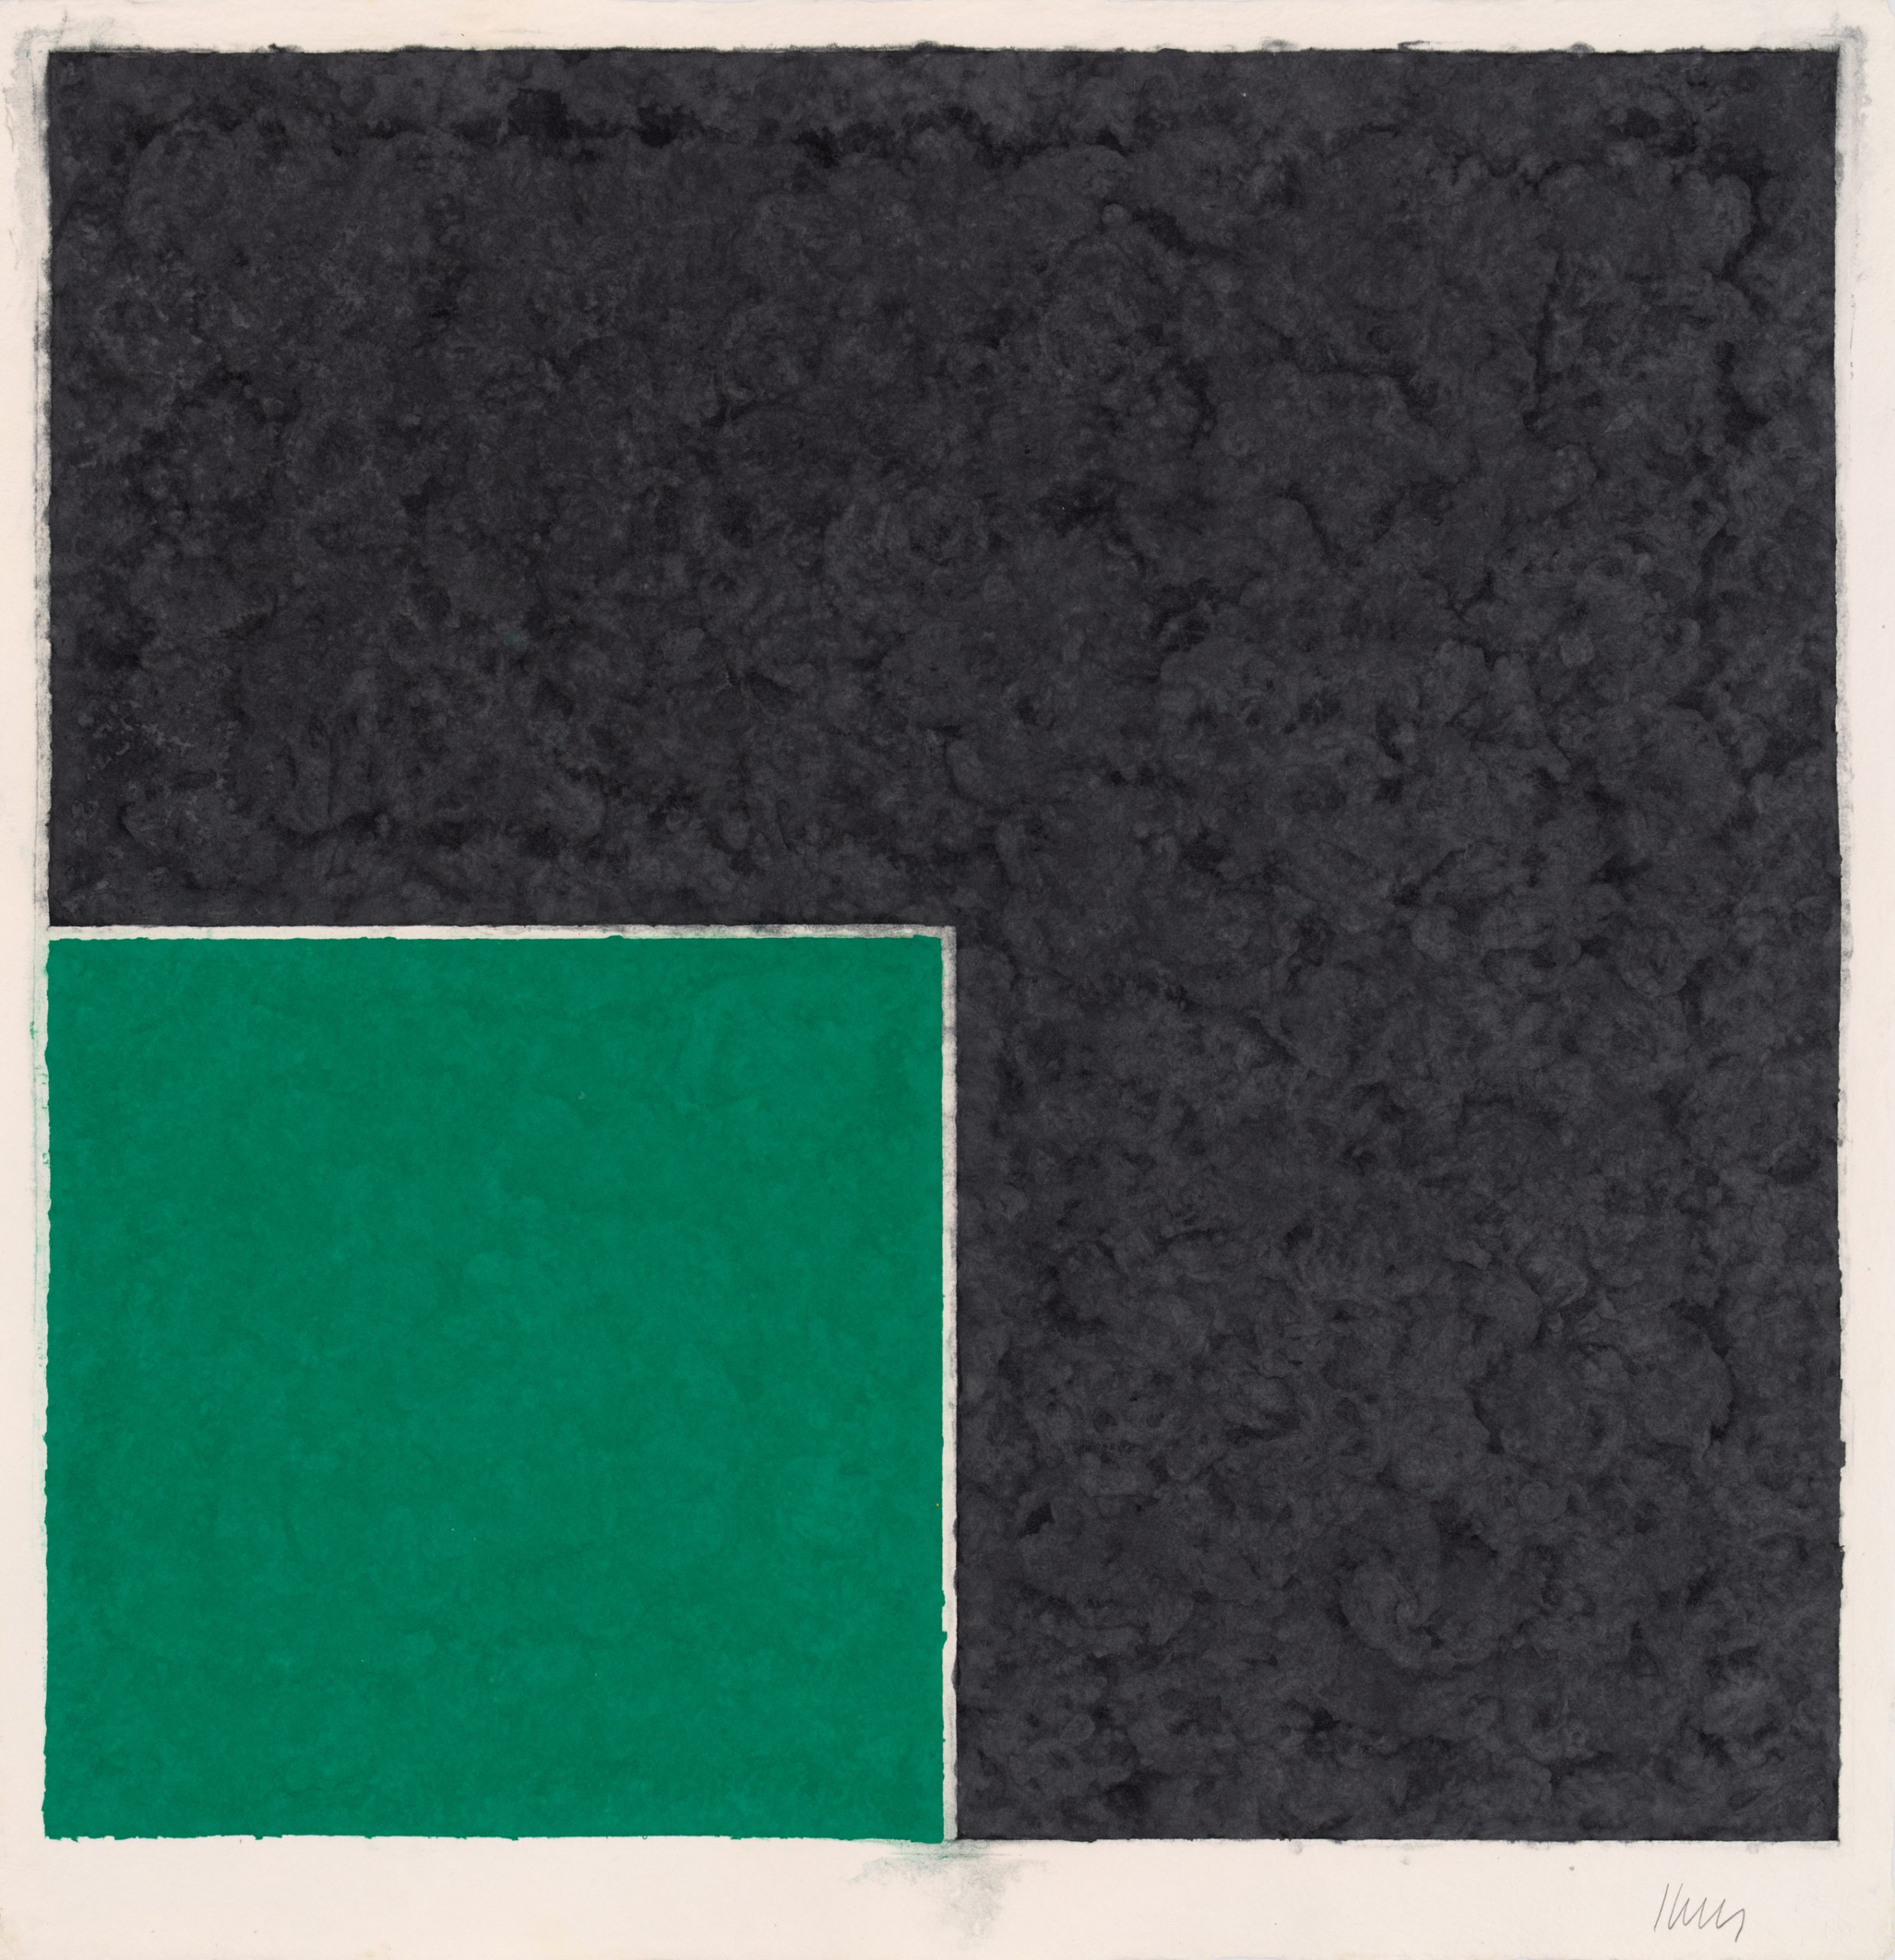 Colored Paper Image XVIII by Ellsworth Kelly